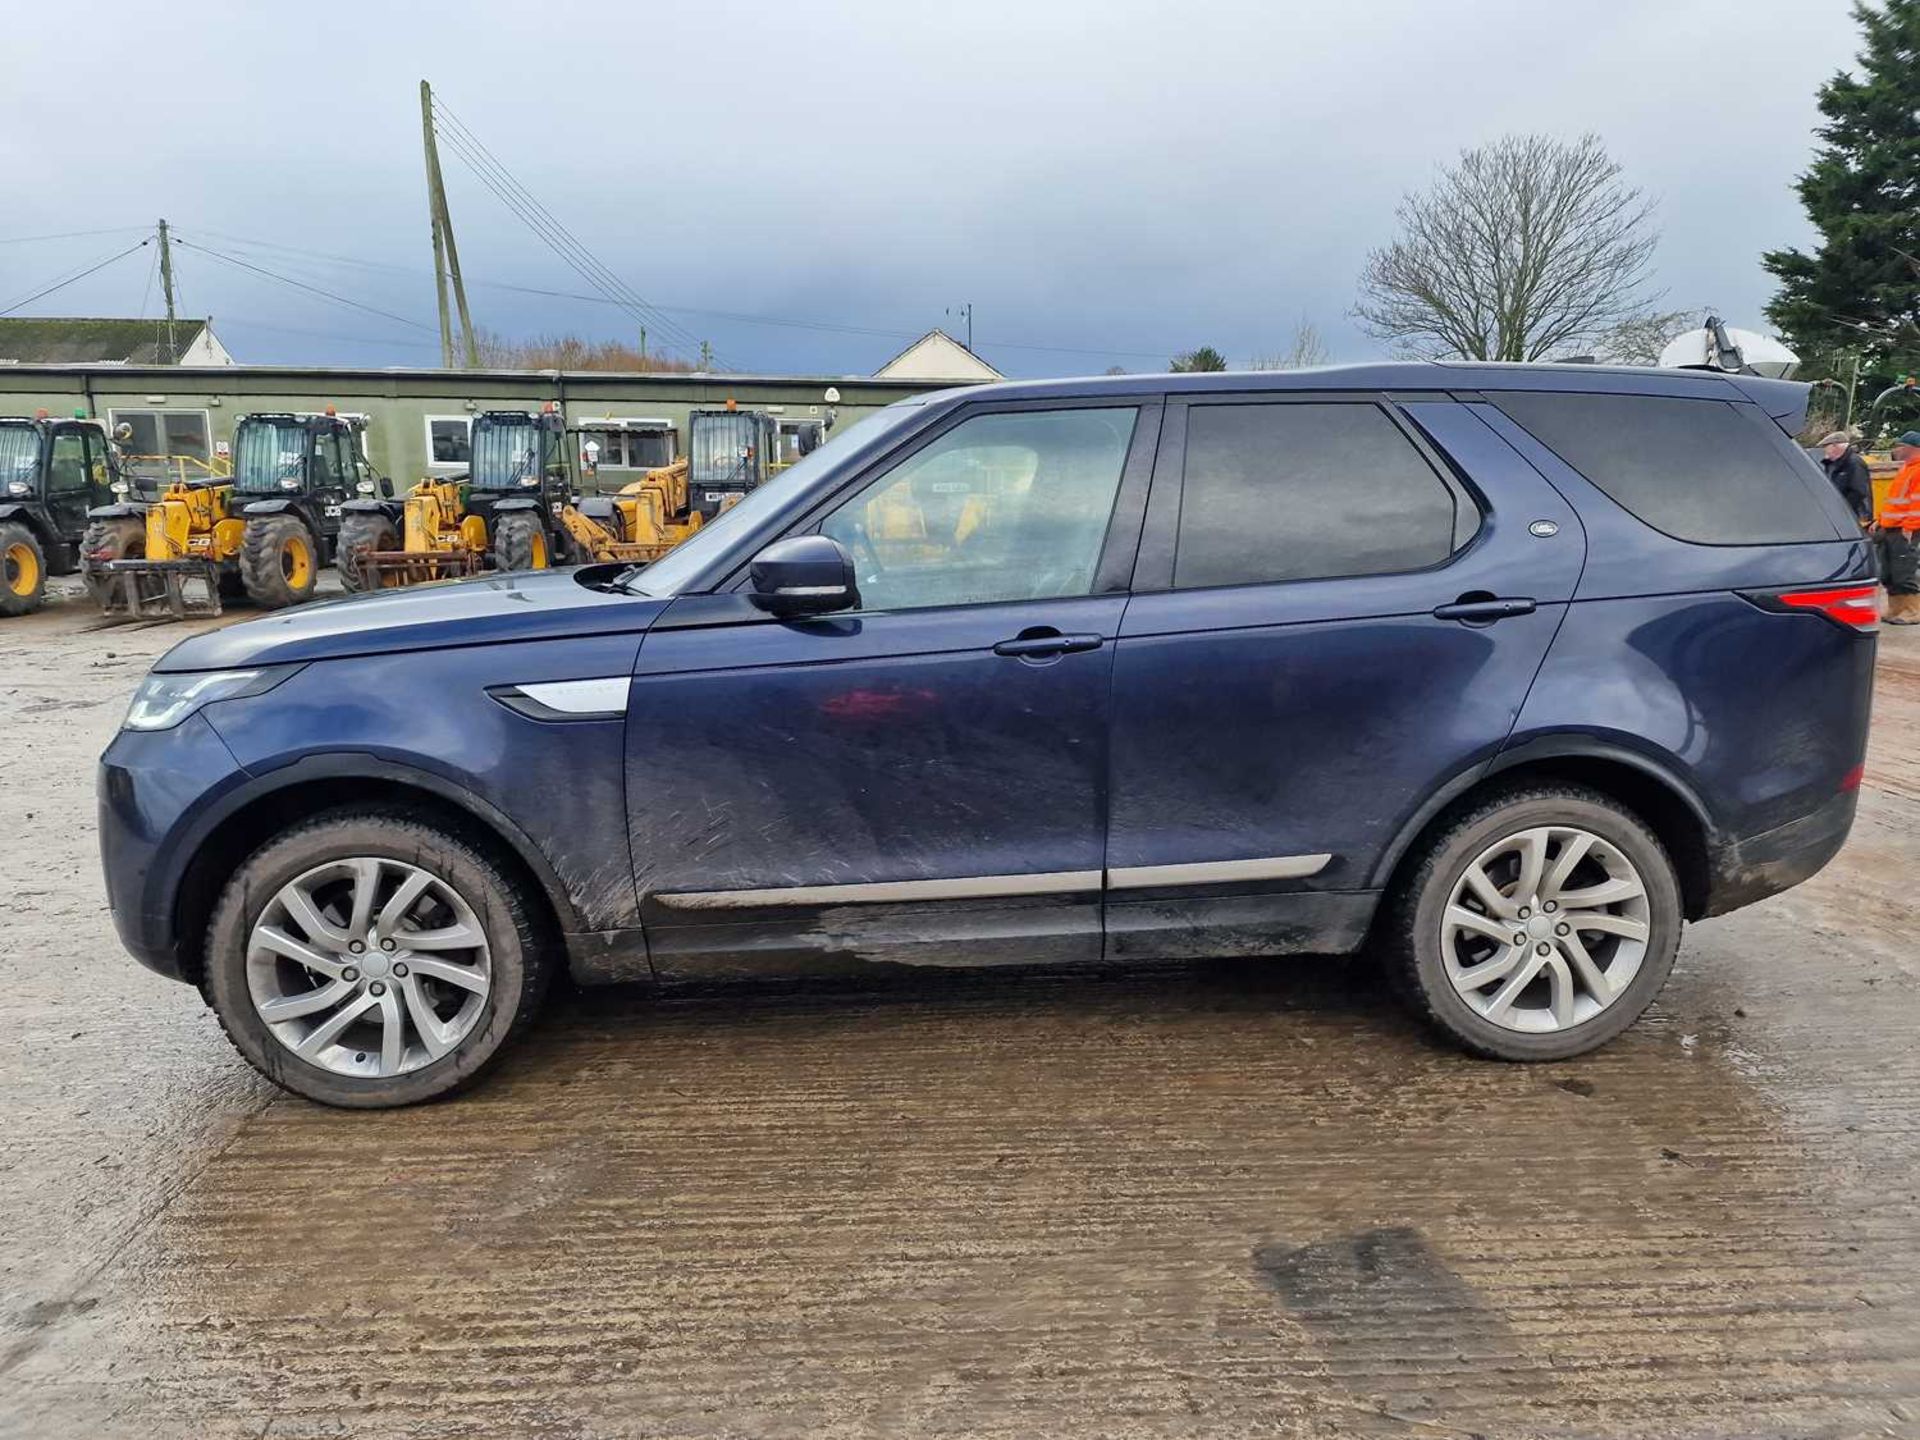 Landrover Discovery HSE Td6, Auto, Paddle Shift, Reverse Camera, Sat Nav, Parking Sensors, Full Leat - Image 27 of 75